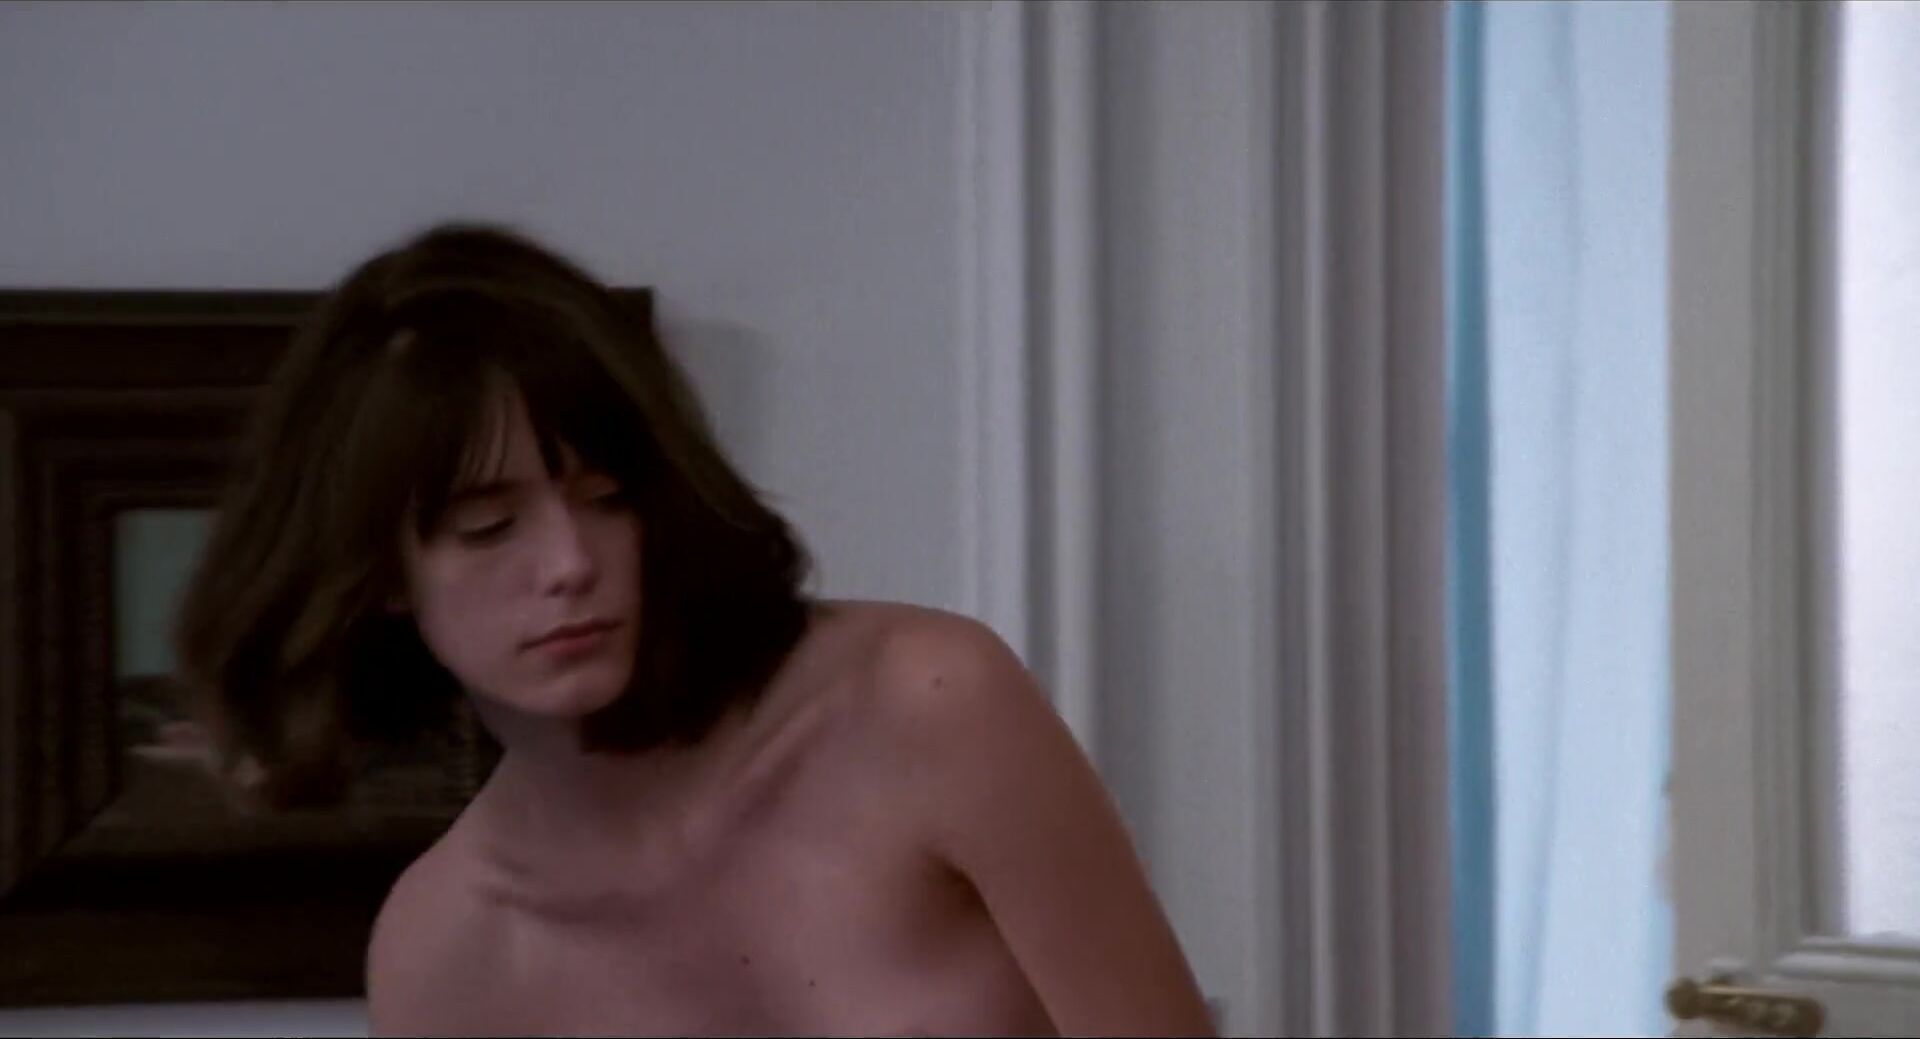 JavSt(ar's) Stacy Martin is in love with French director who drills her in Redoubtable (2017) Tiny Titties